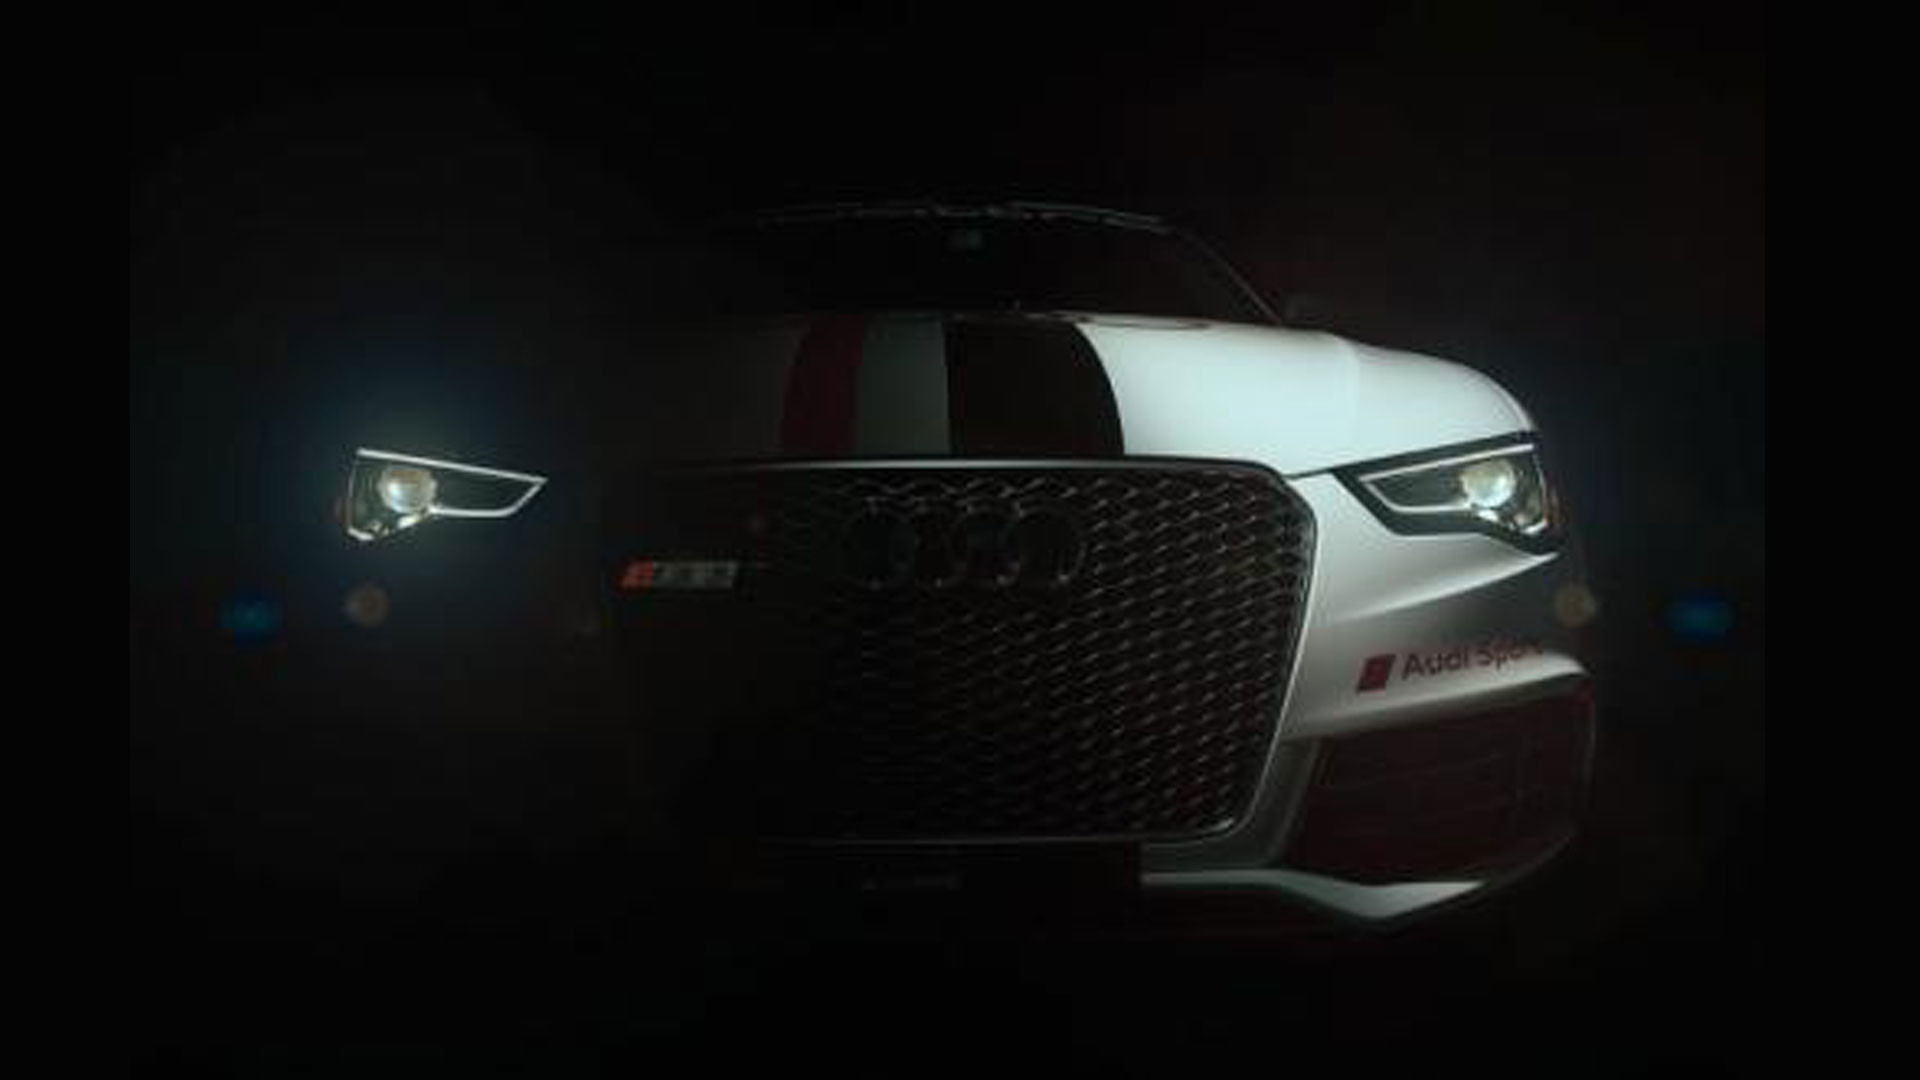 1920x1080 Audi Wallpaper For Iphone